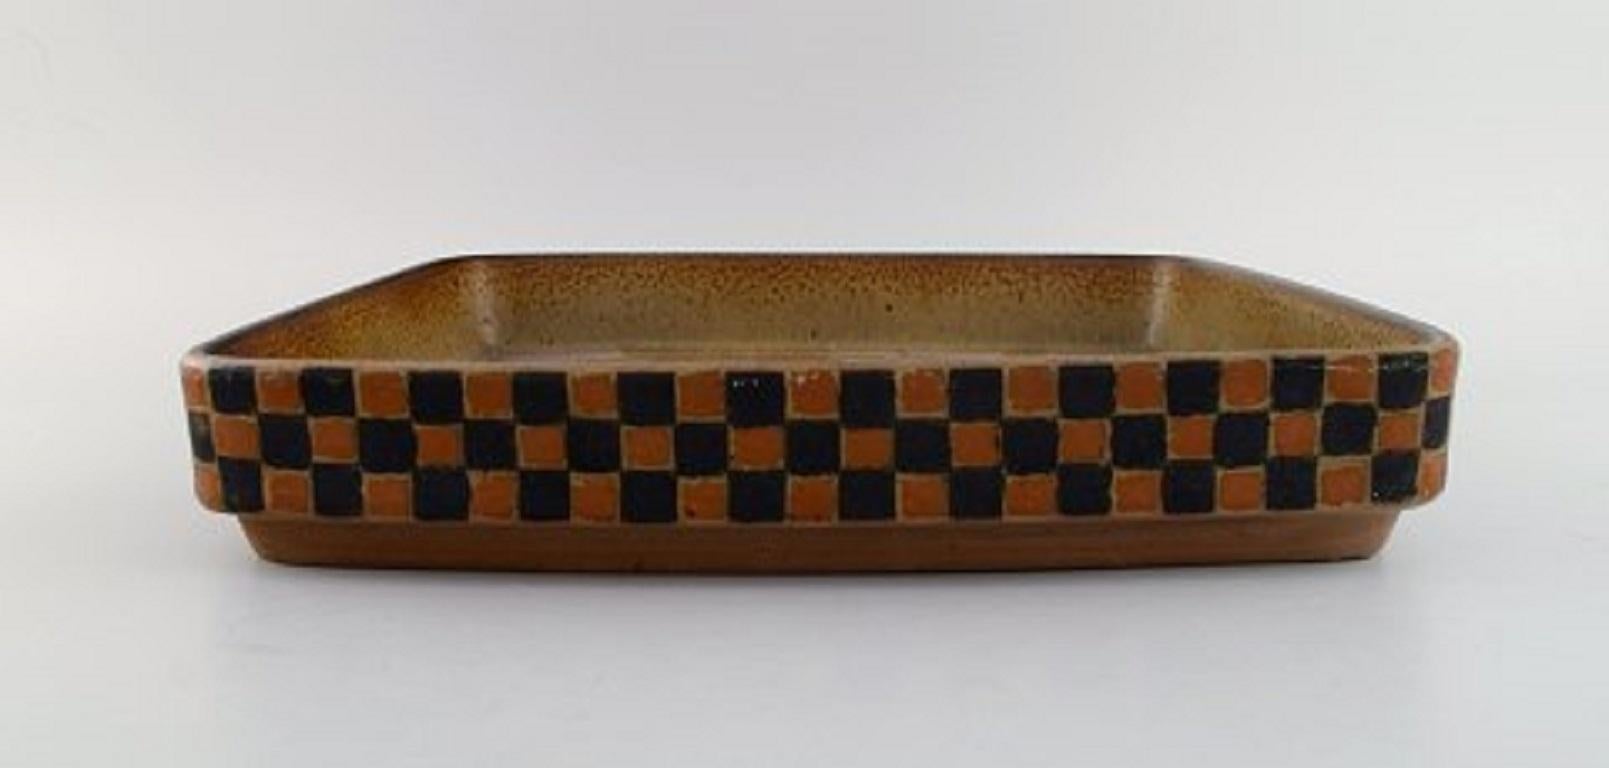 Stig Lindberg (1916-1982) for Gustavsberg. Large square Silur dish in glazed stoneware. Swedish design, 1960s.
Measures: 32 x 32 x 5.2 cm.
In excellent condition.
Stamped.